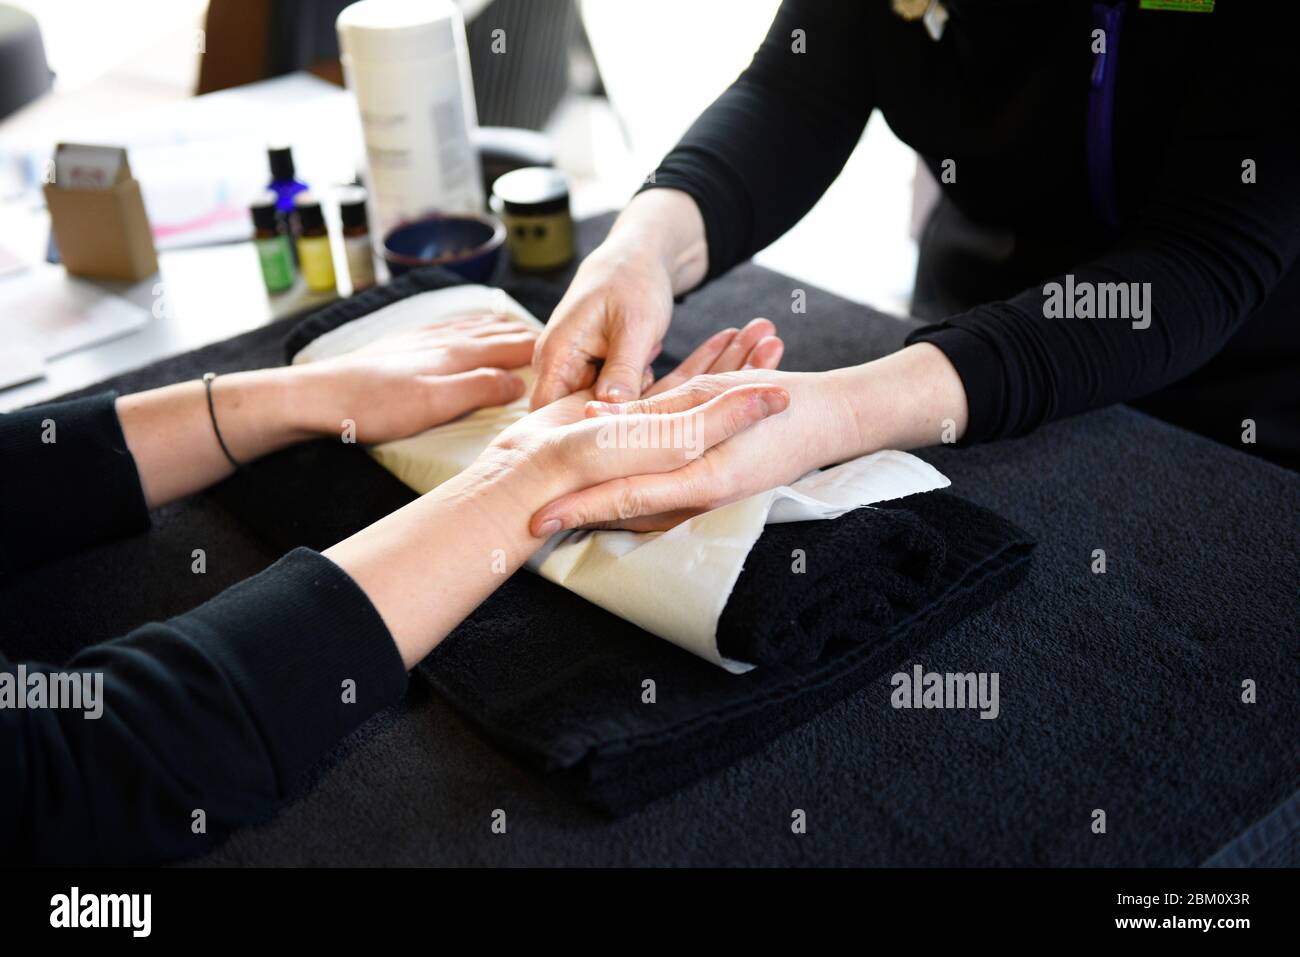 A Hand Massage Session Sometimes Known As Hand Reflexology Hand Massaging Helps New Oxygen